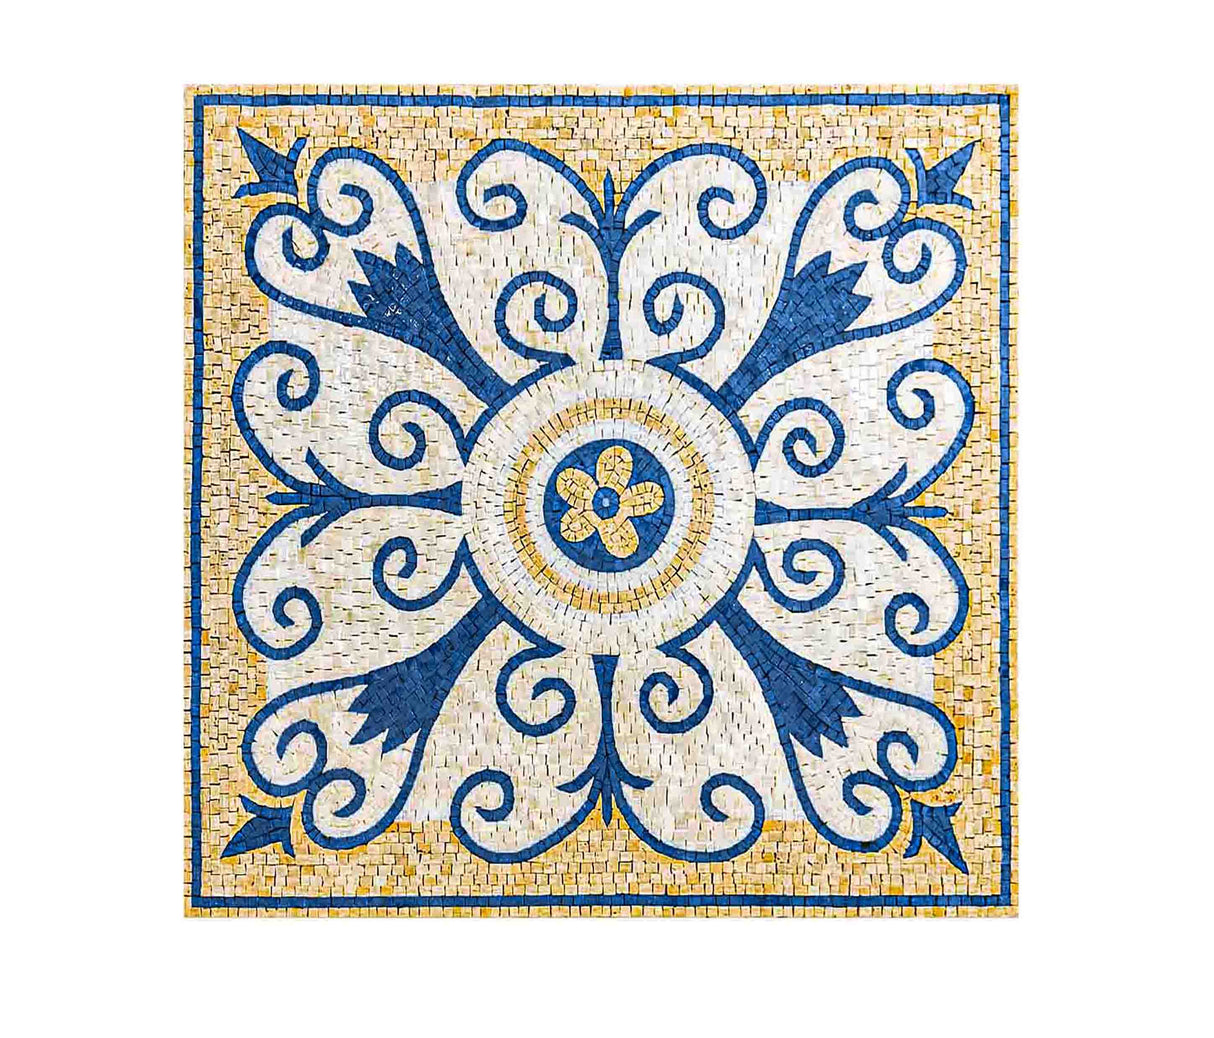 Square Navy Blue and Golden color Scrolls Design Marble Mosaic Kitchen Backsplash Art Tile Customization available for size and colors, Indoor/Outdoor Ok.